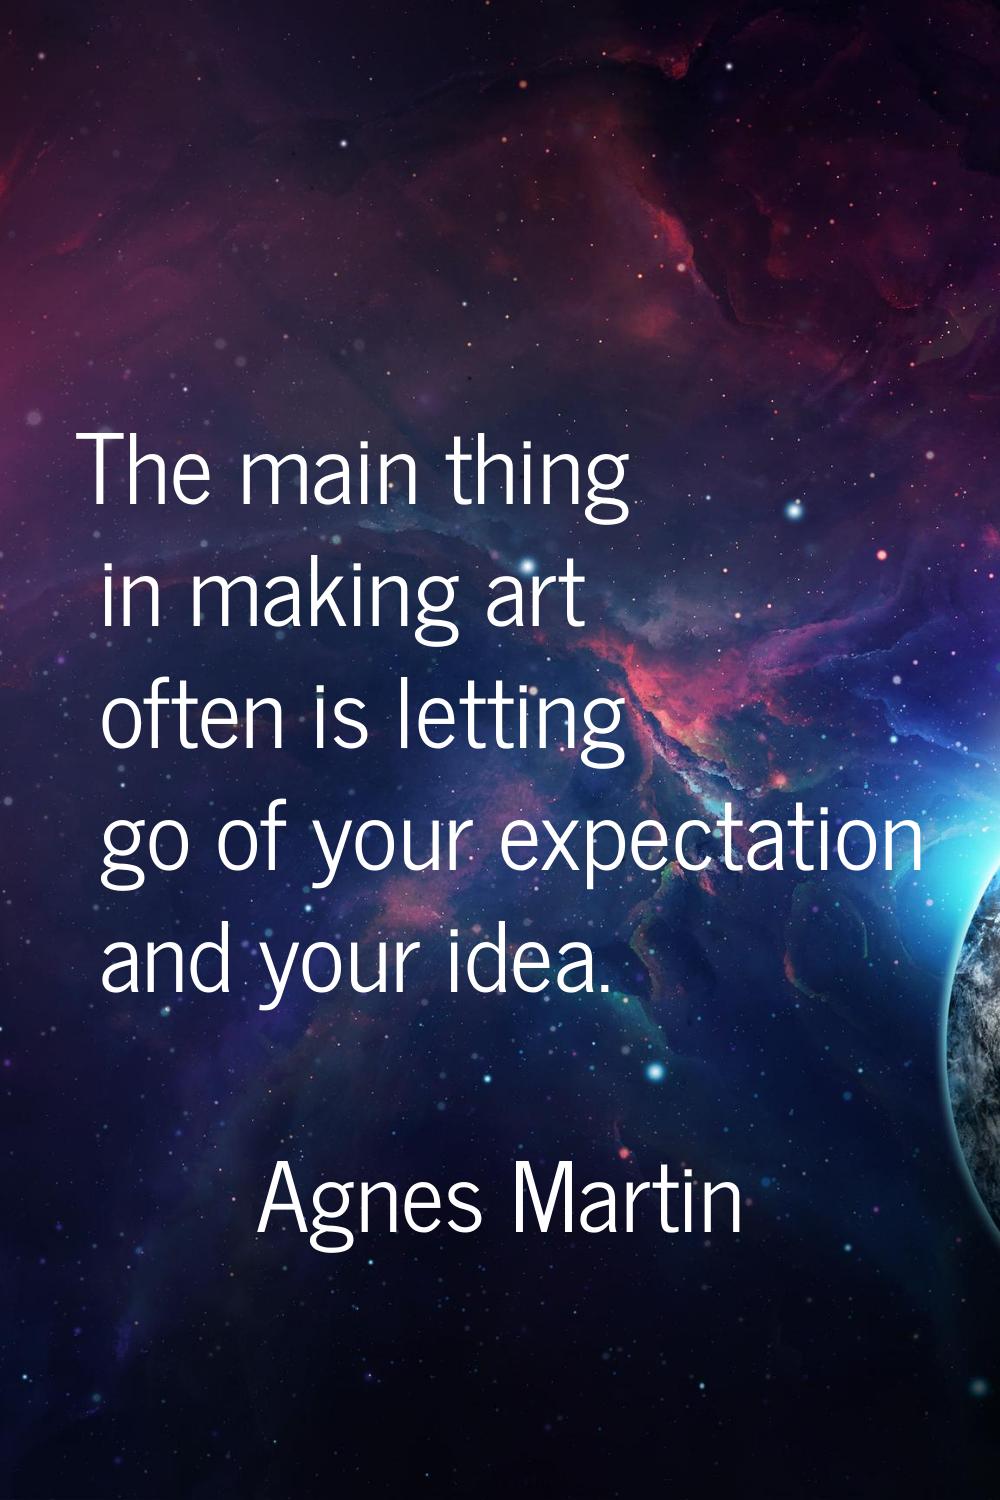 The main thing in making art often is letting go of your expectation and your idea.